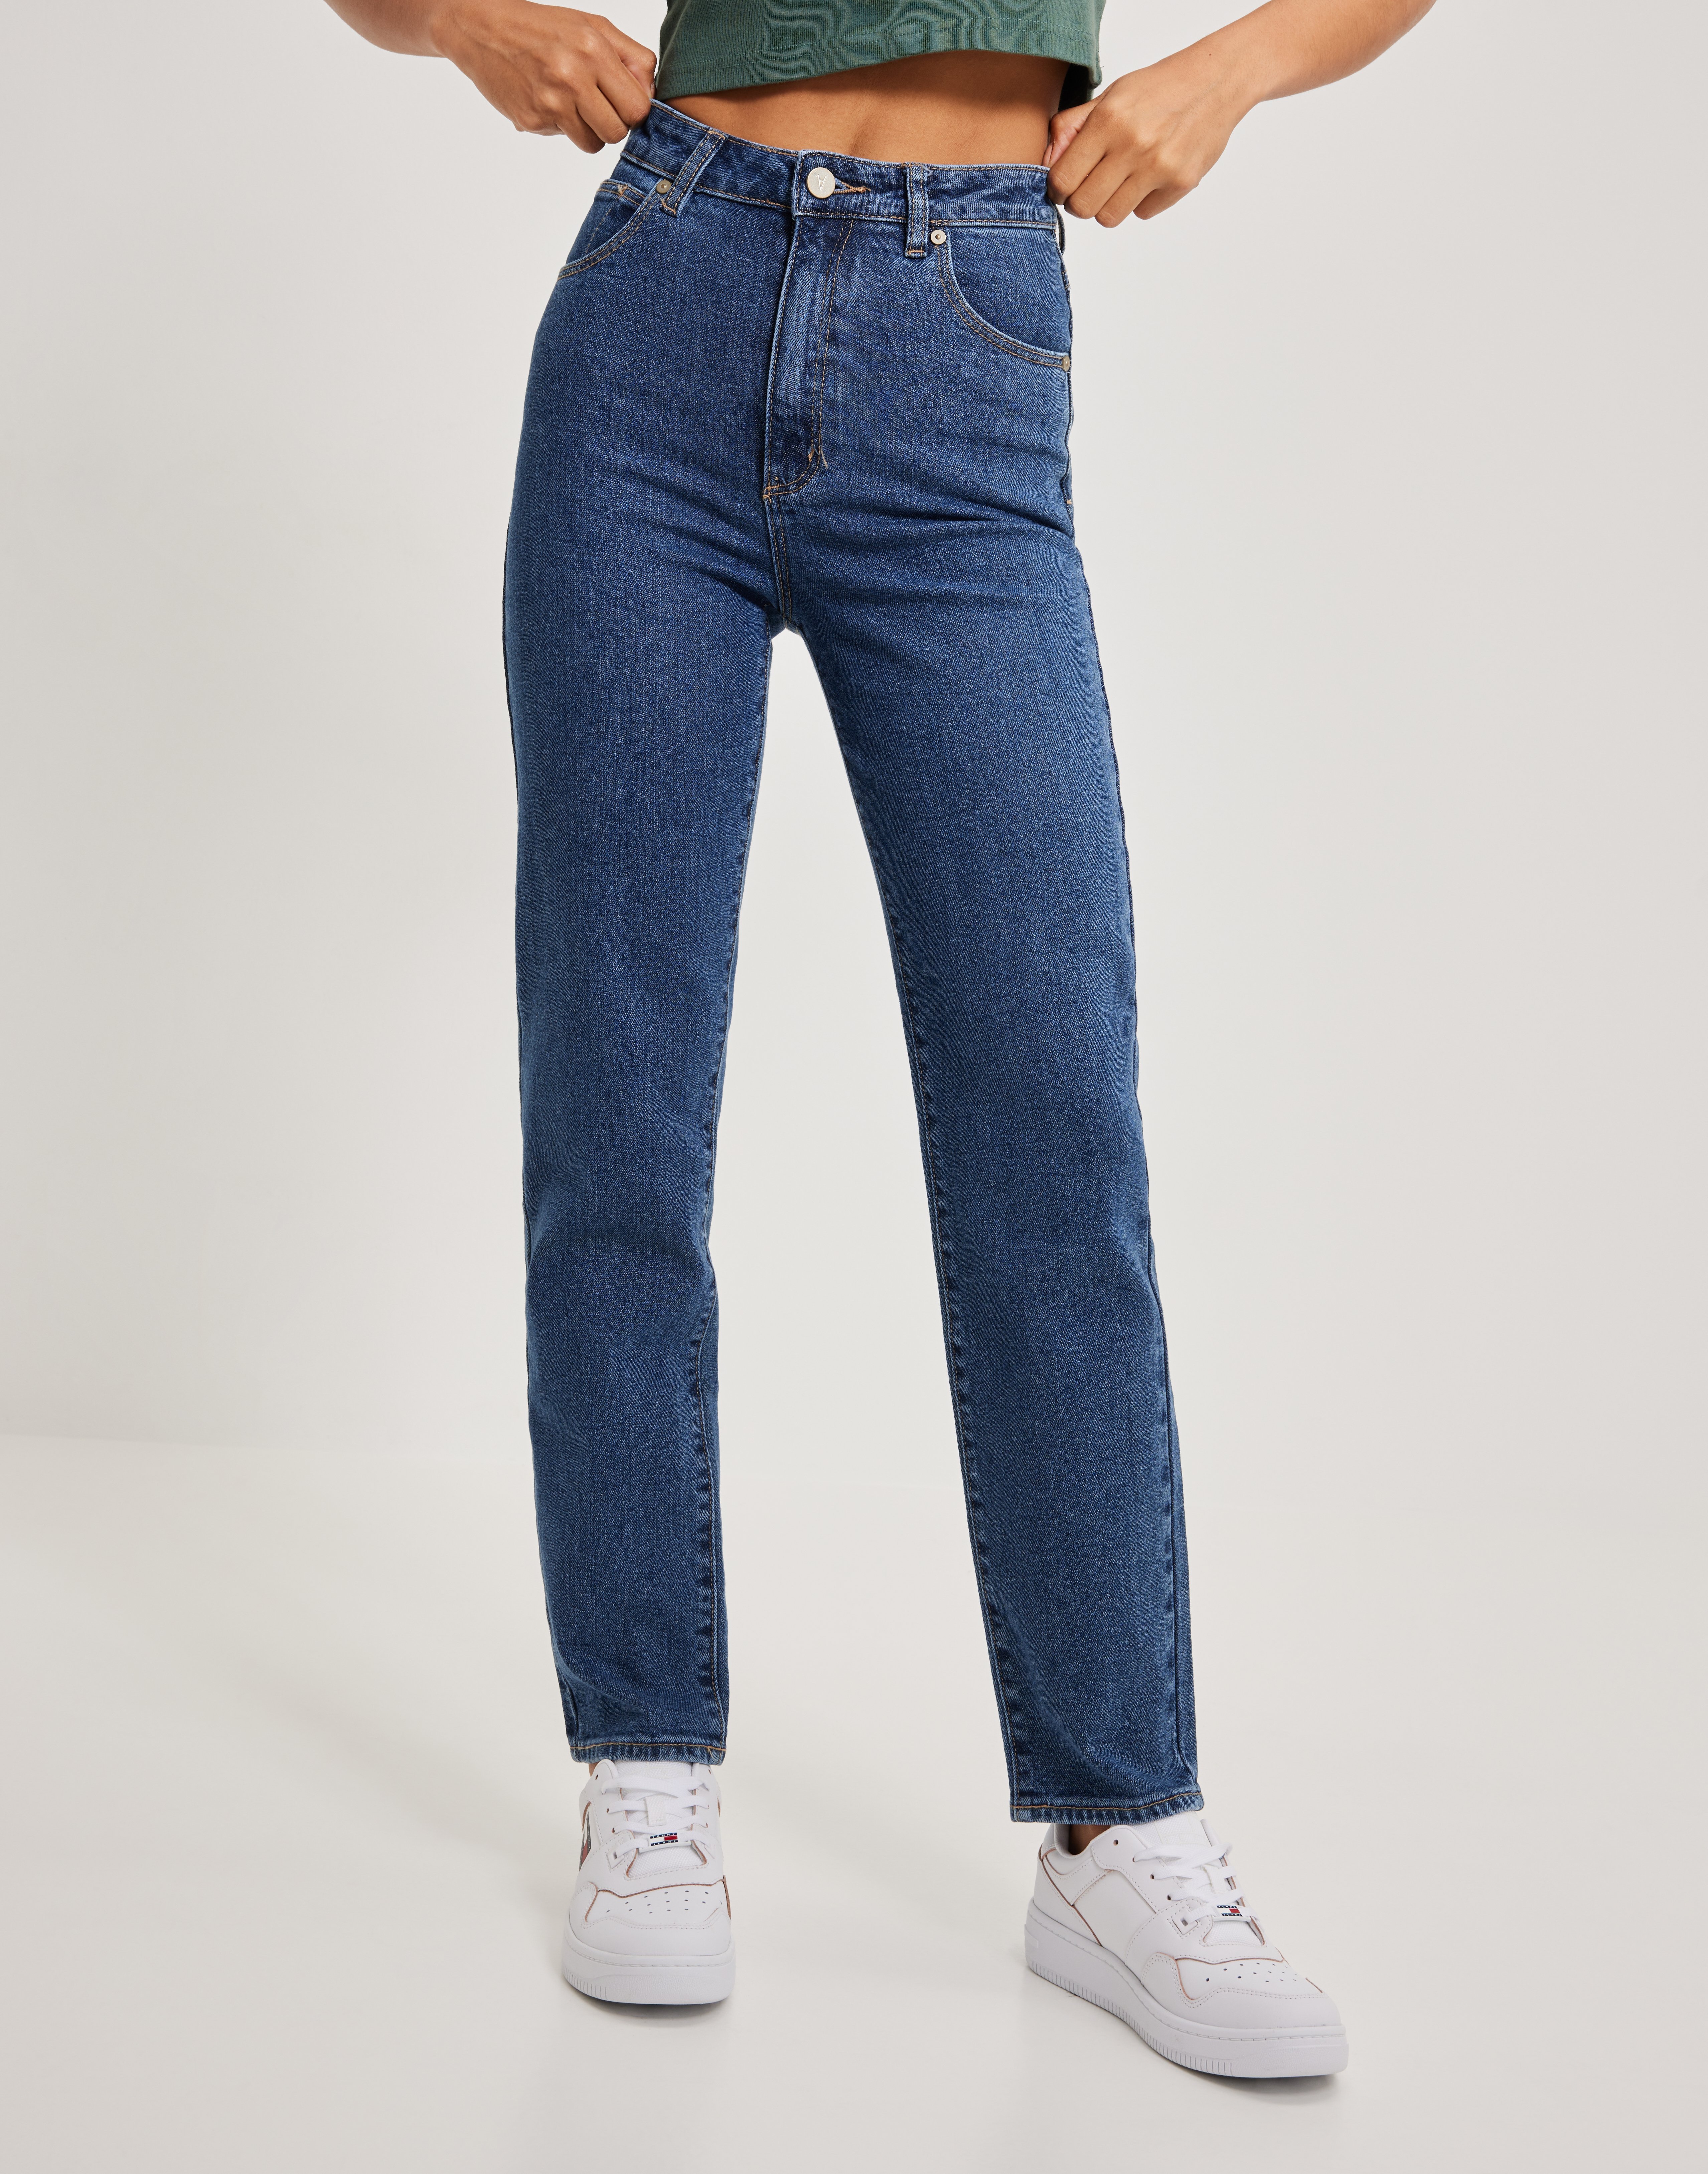 Abrand Jeans - High waisted jeans - A '94 High Slim Tall Electra - Jeans